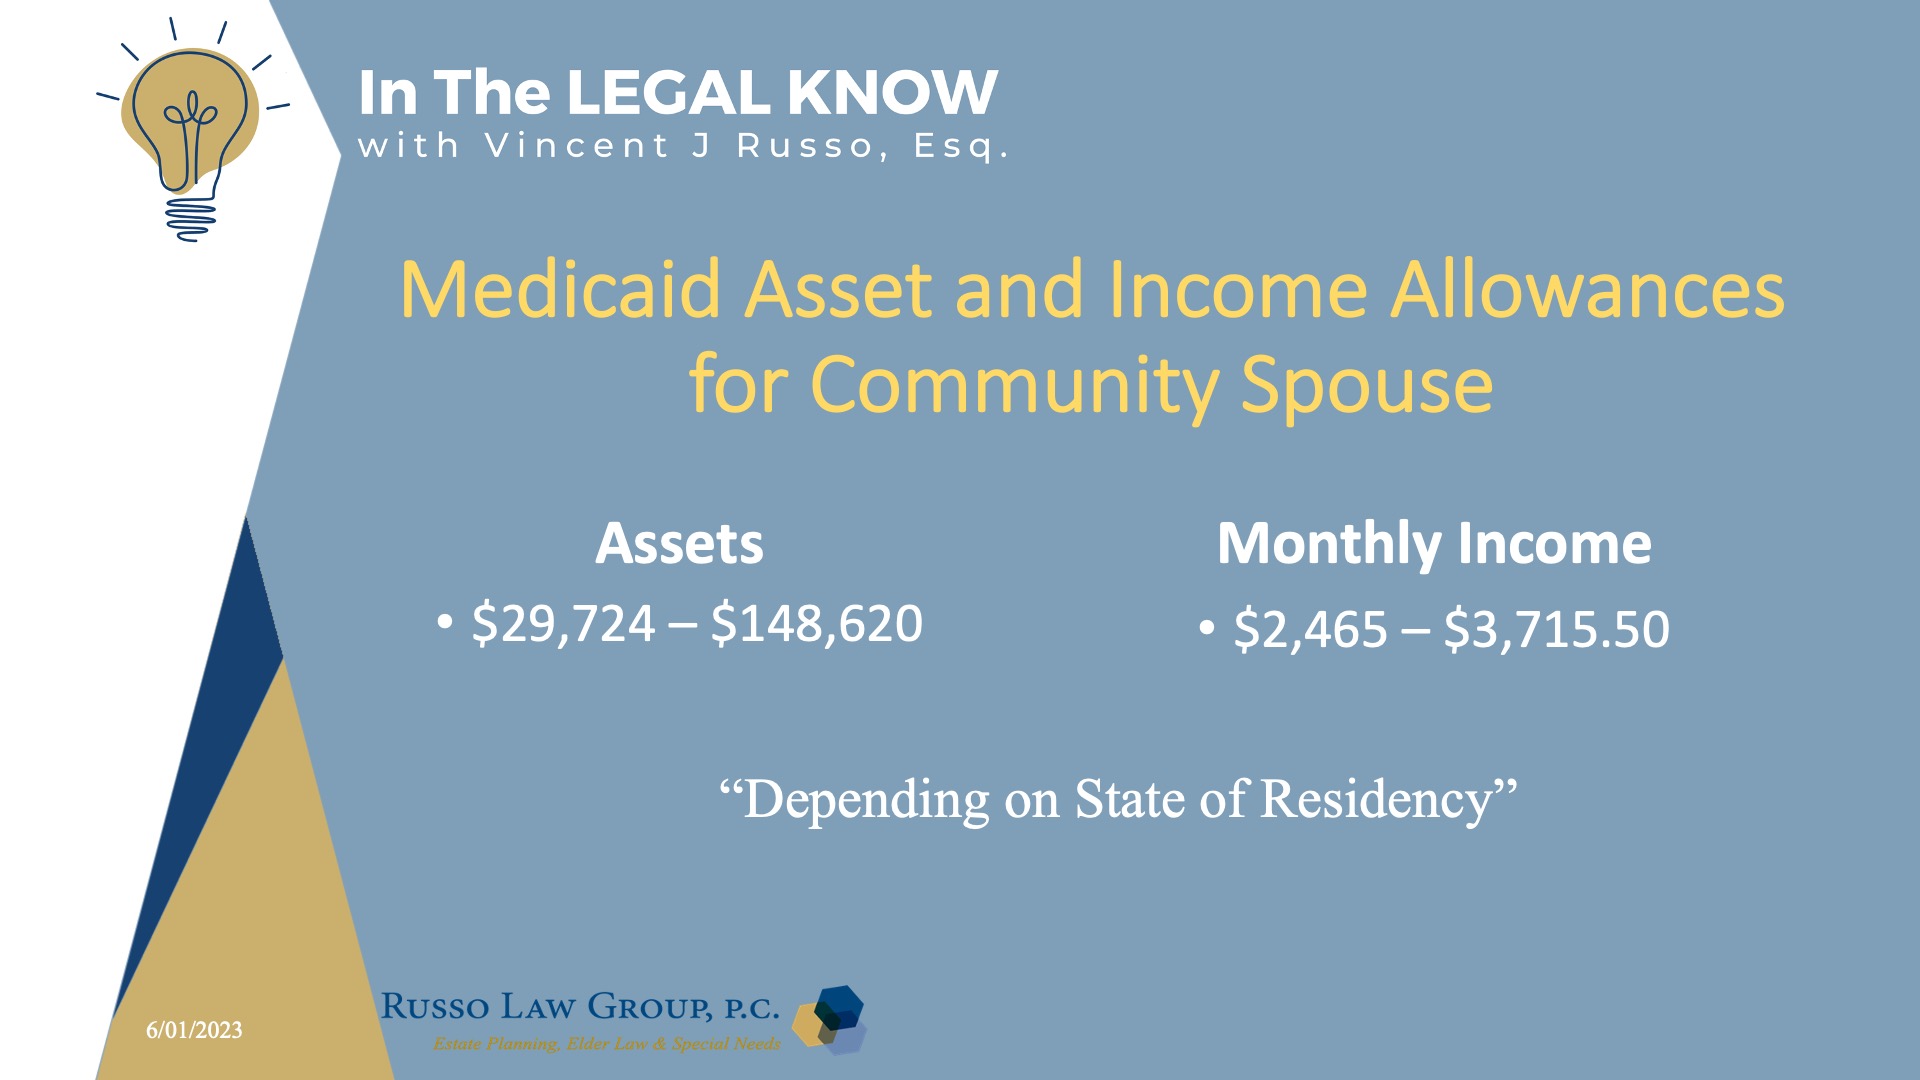 Medicaid Asset and Income Allowances for Community Spouse